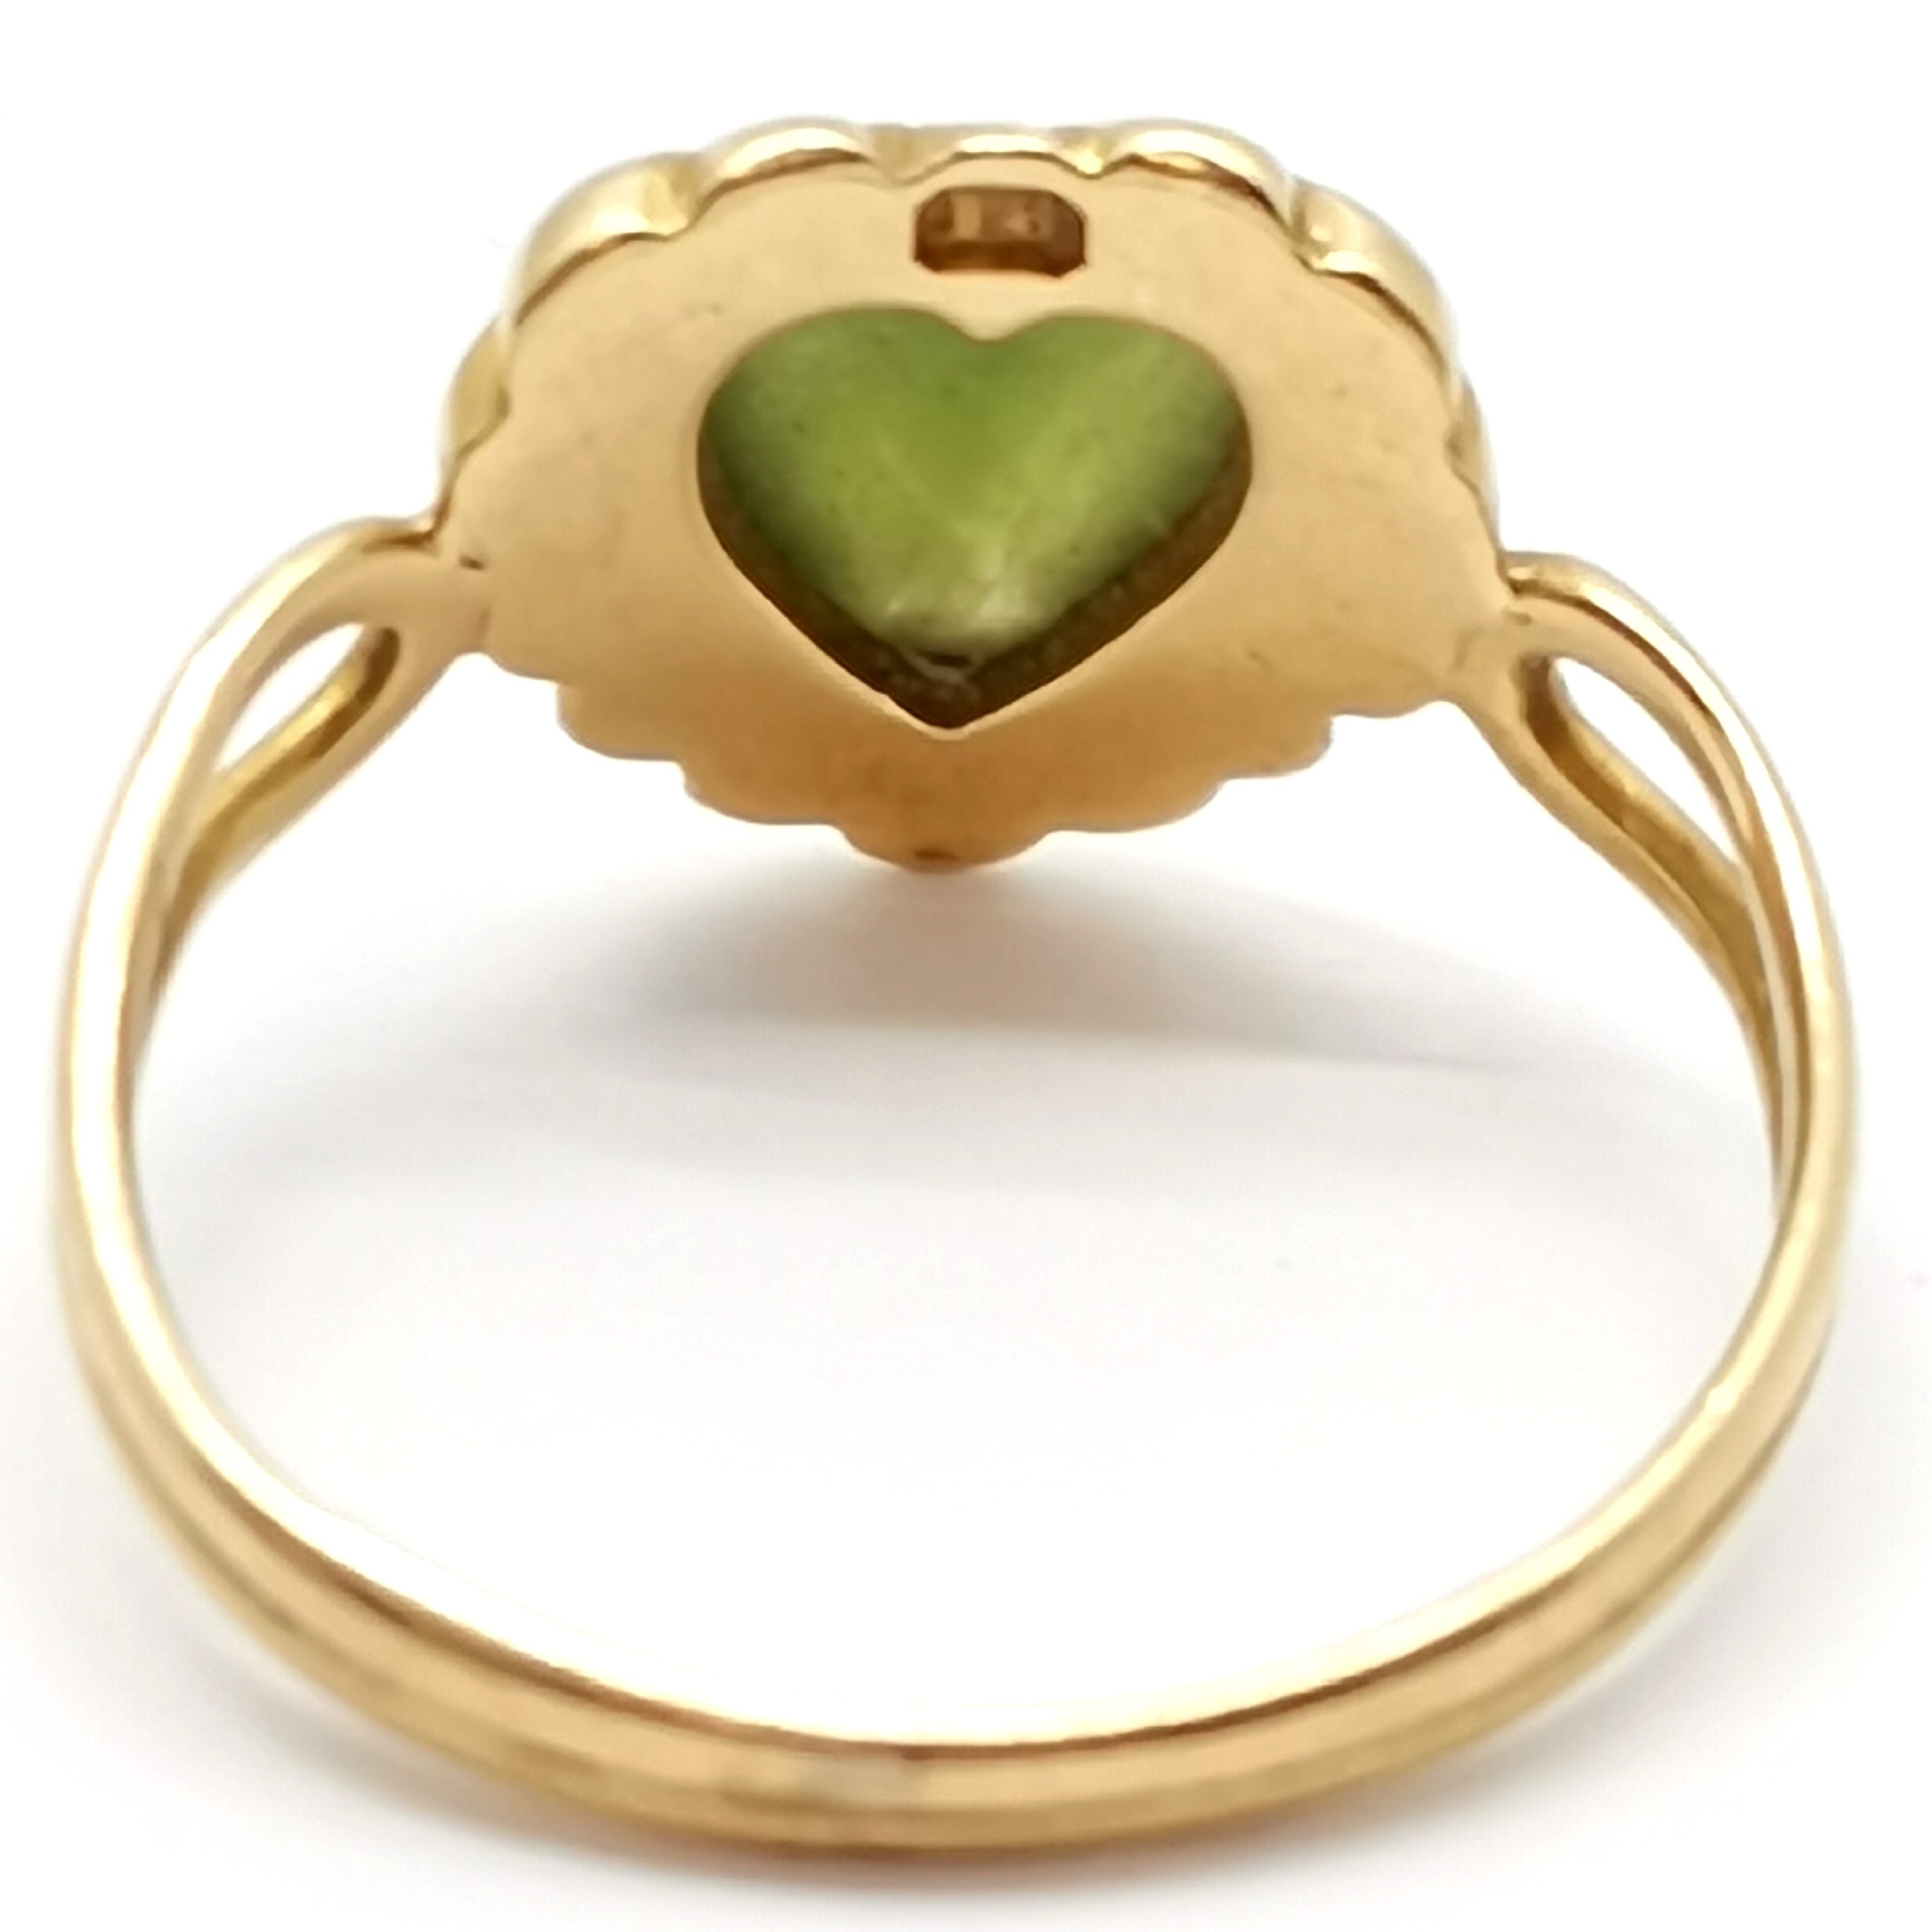 Antique unmarked gold ring with heart shaped green stone with pearl surround (missing 1 pearl) - - Image 2 of 4